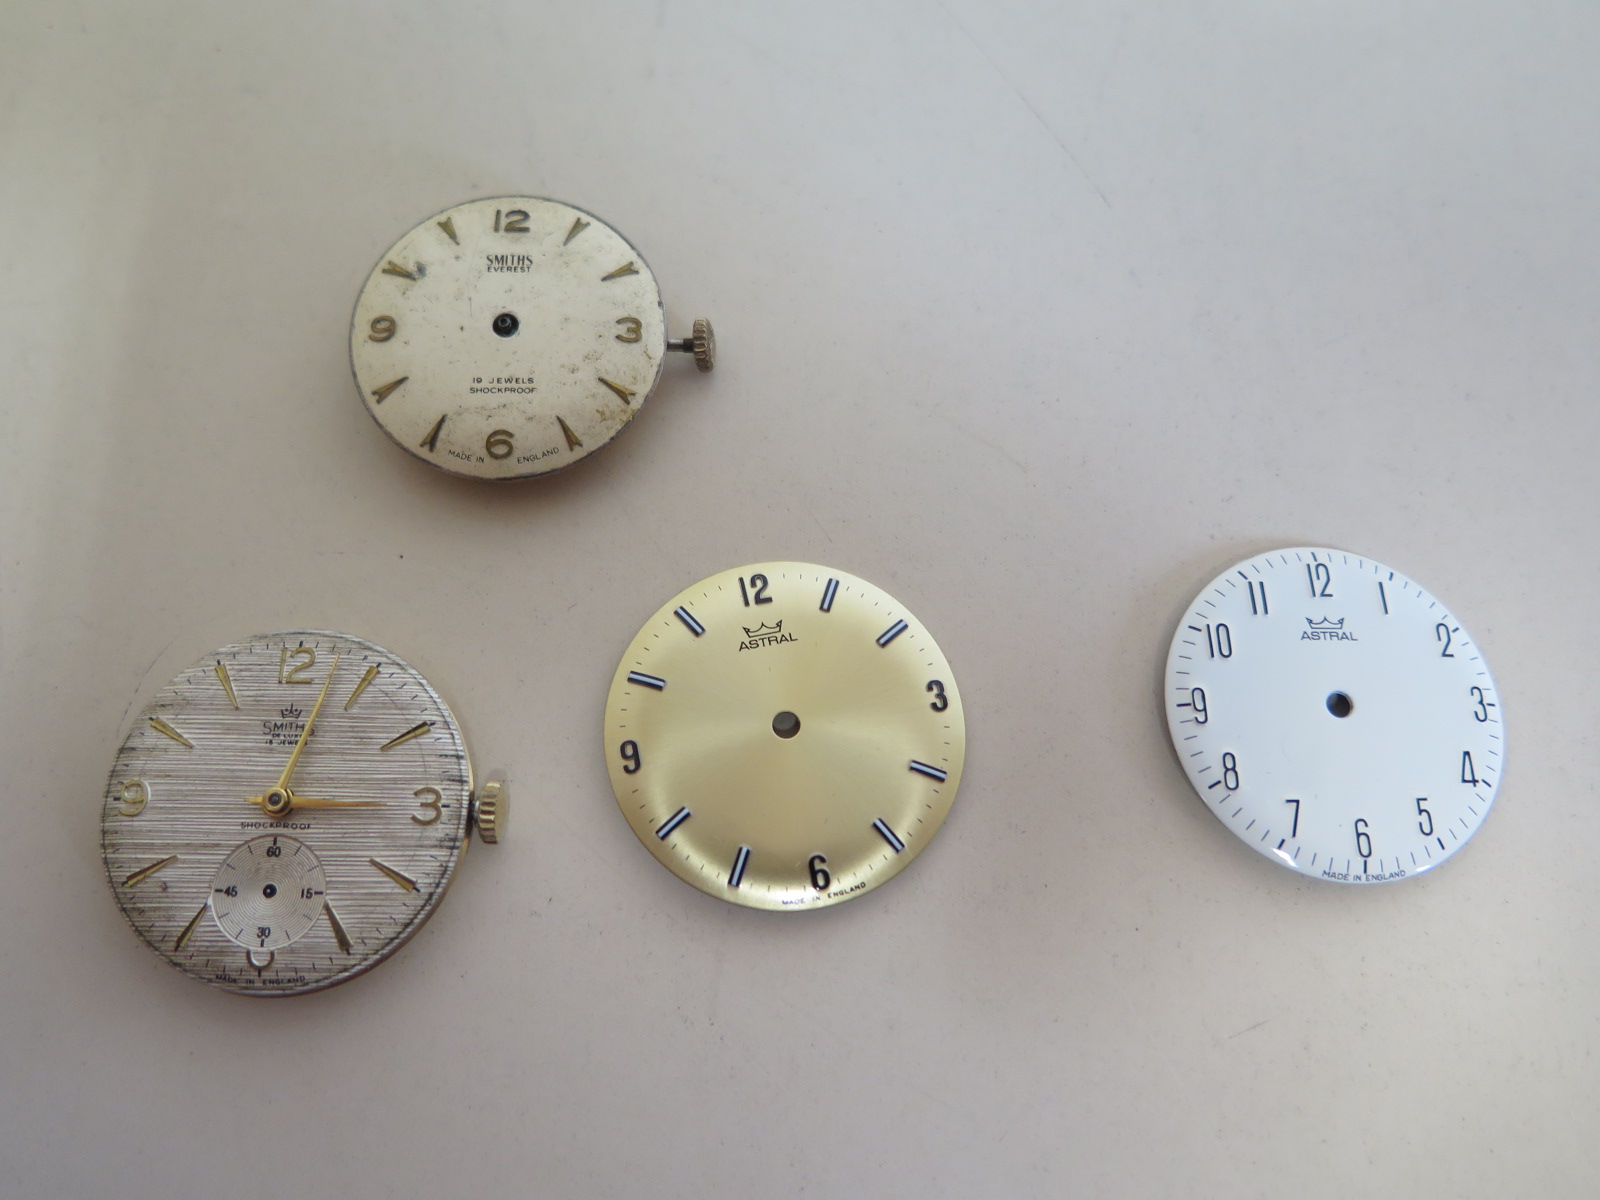 Two English made Smiths gents wristwatch movements and dials, with swinging balance wheels and two